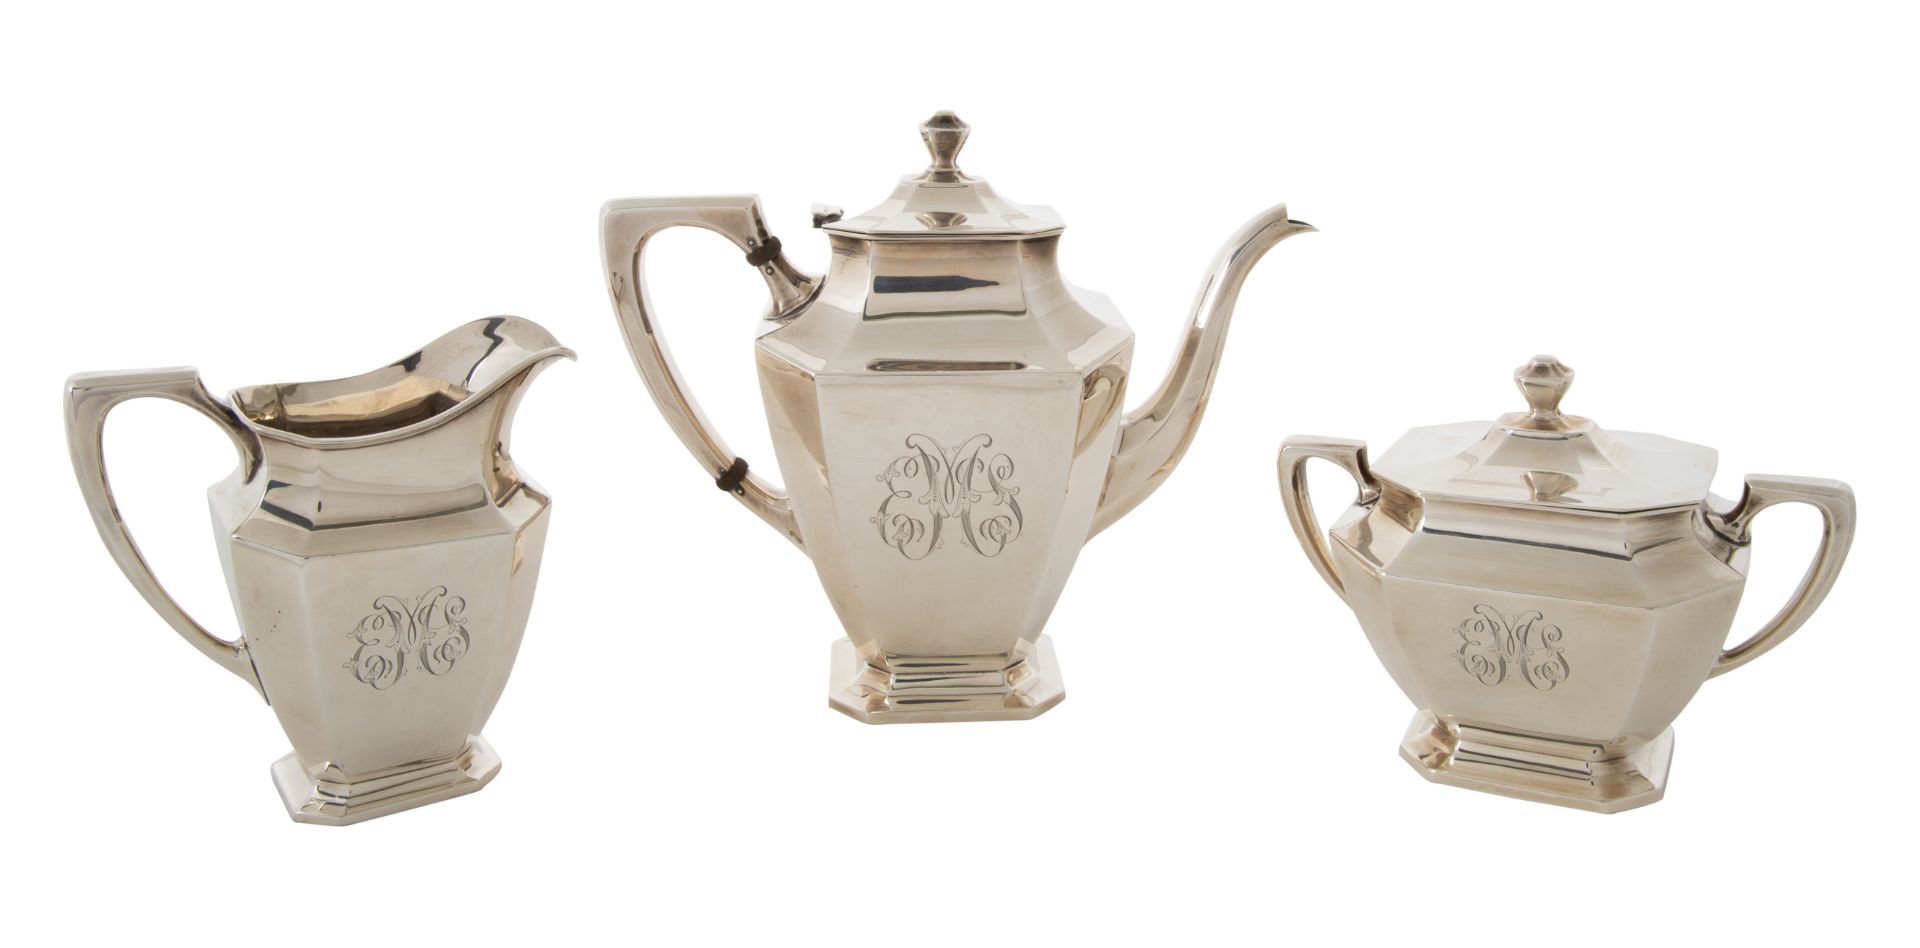 AN AMERICAN THREE-PIECE STERLING SILVER SET, R. WALLACE & SONS CO., 20TH CENTURY - Image 3 of 4